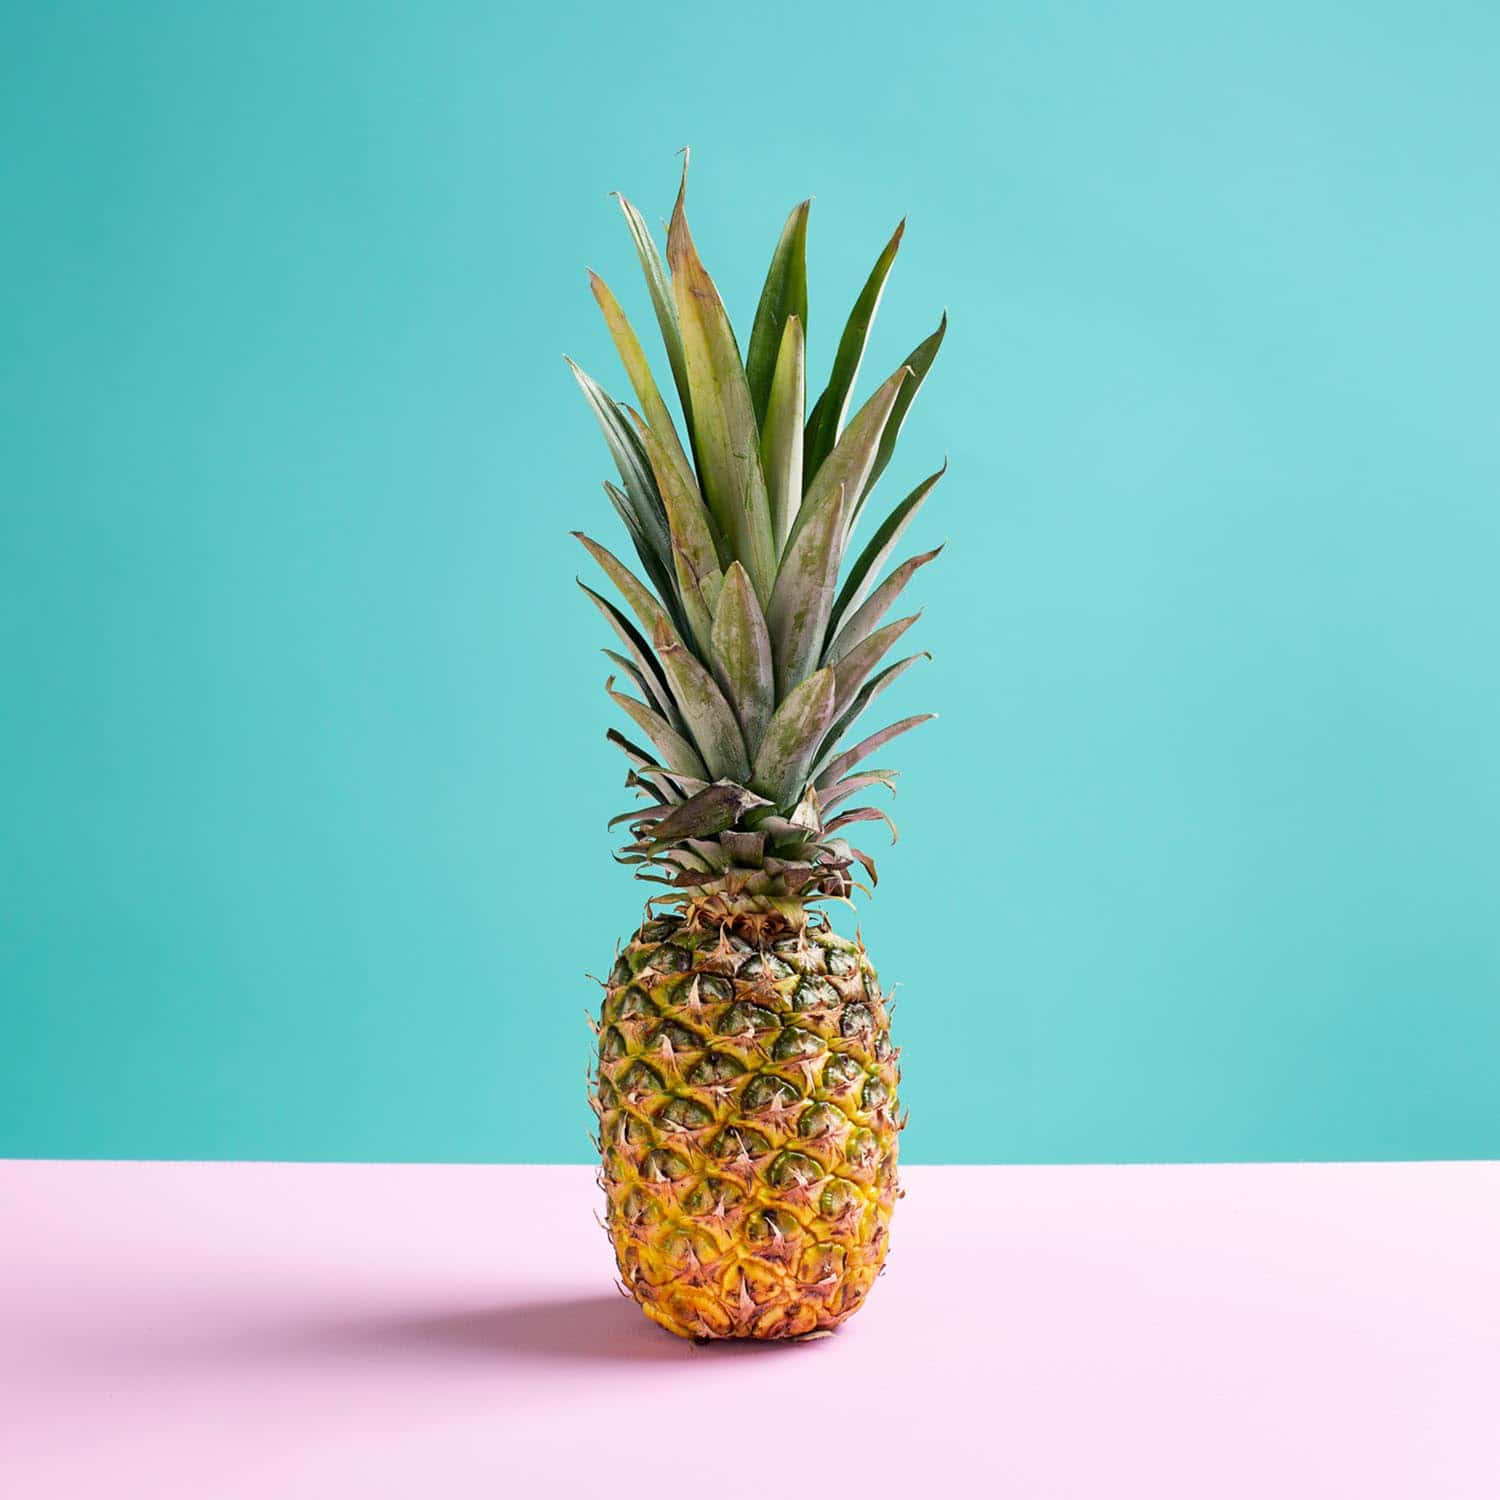 Pineapple on bright background